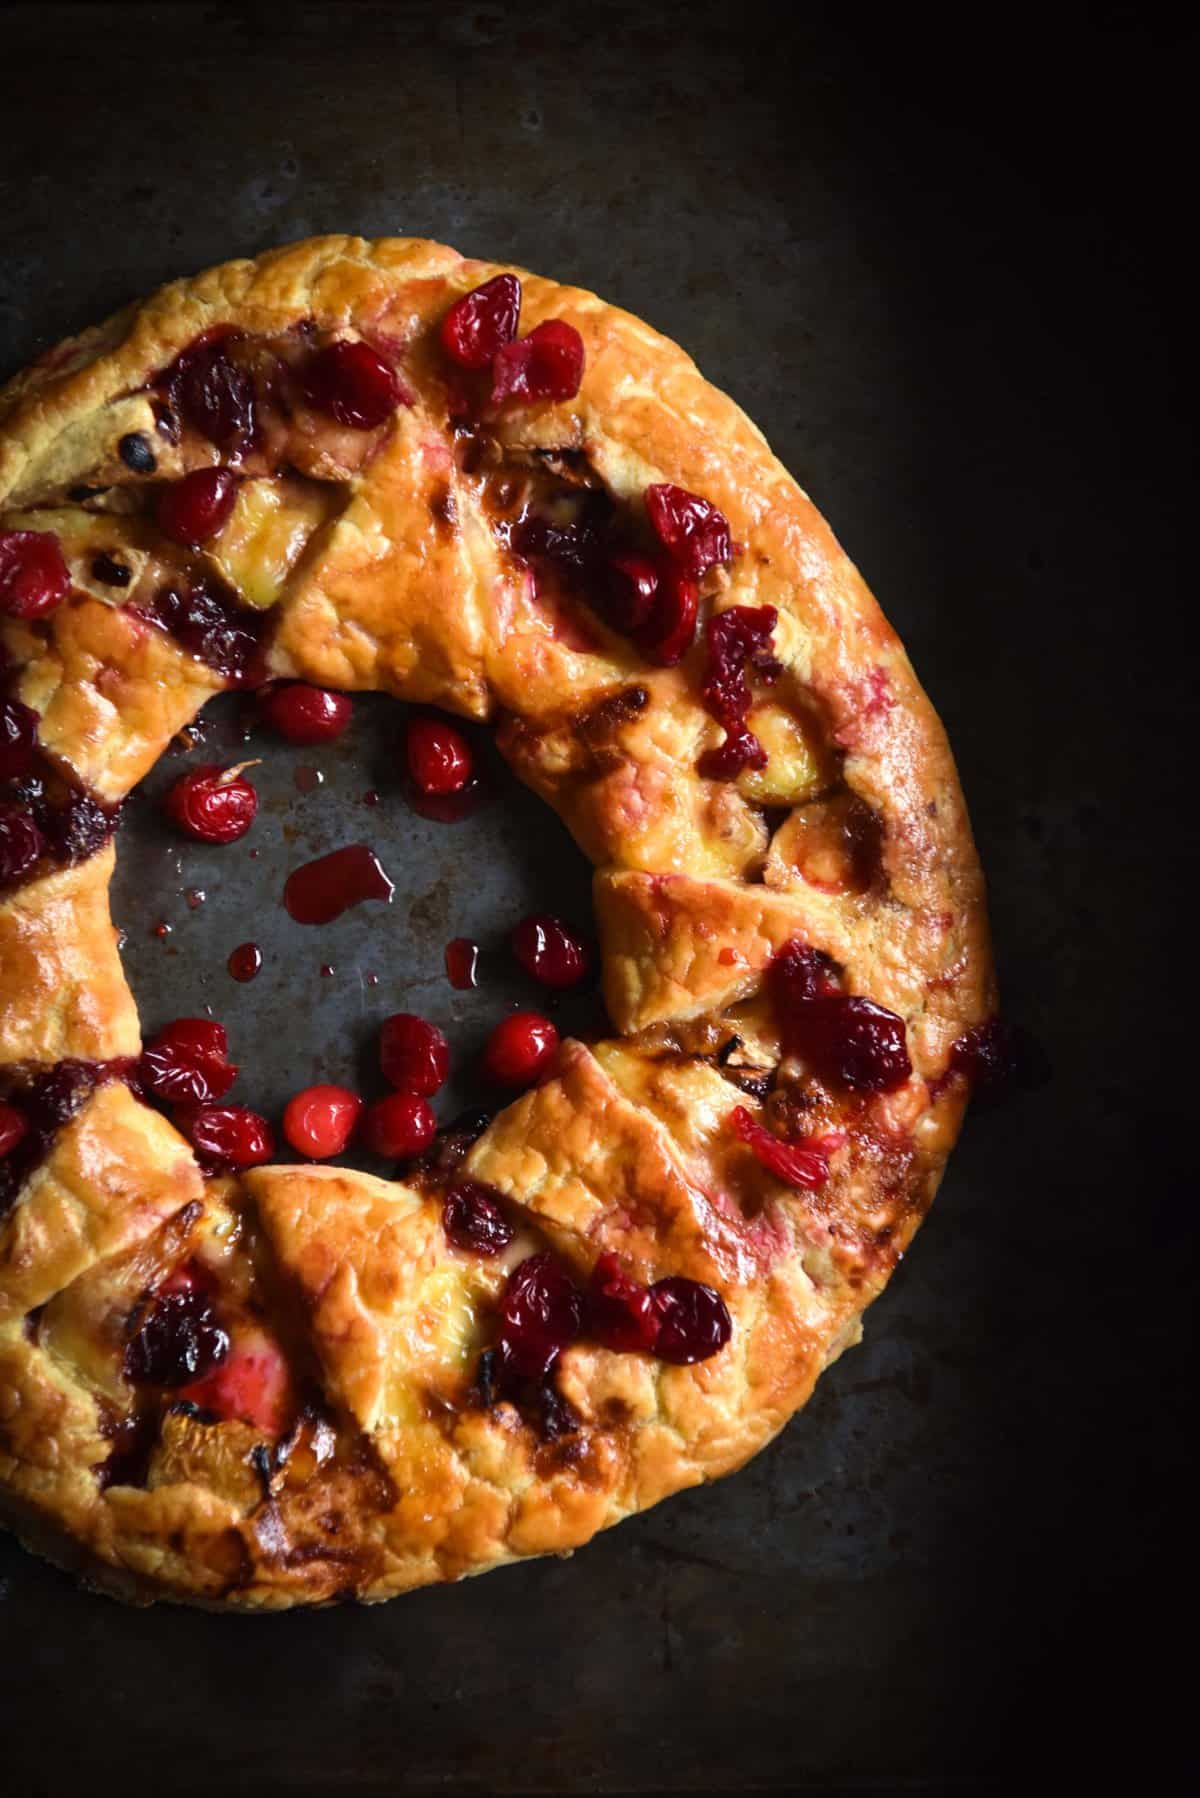 Gluten free brie and cranberry wreath with easy, flaky gluten free pastry sits on a dark steel backdrop